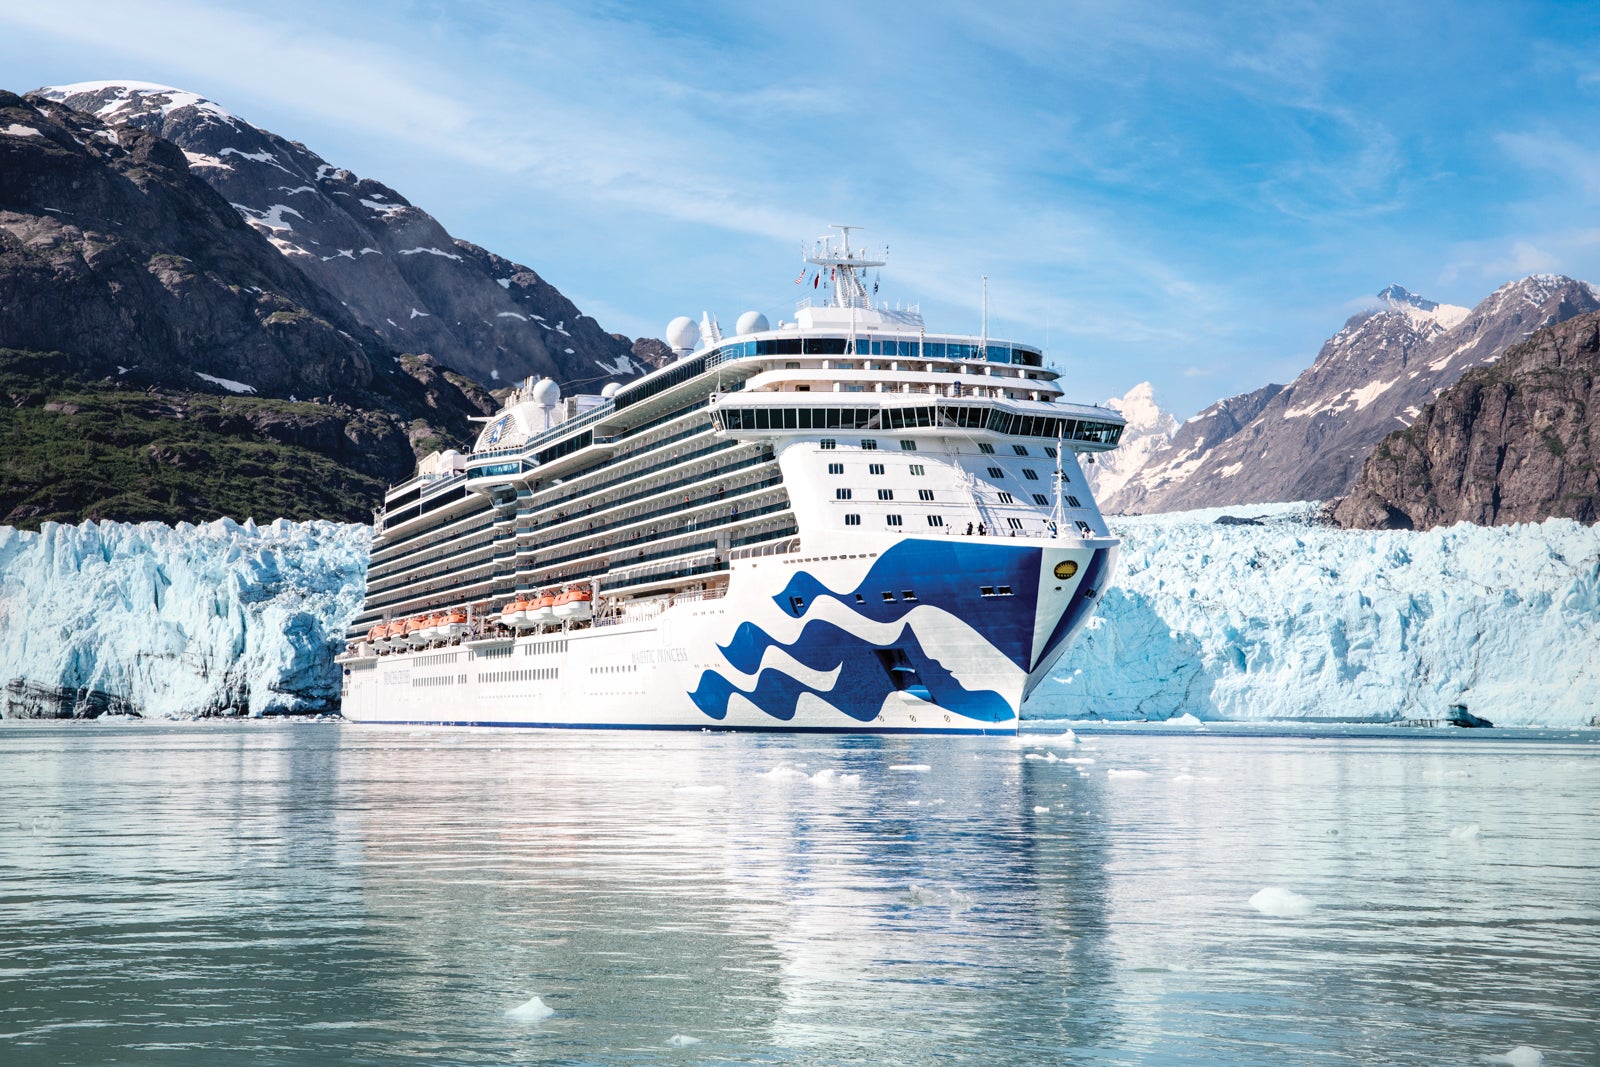 Alaska cruise guide: Best itineraries, planning tips and things to do